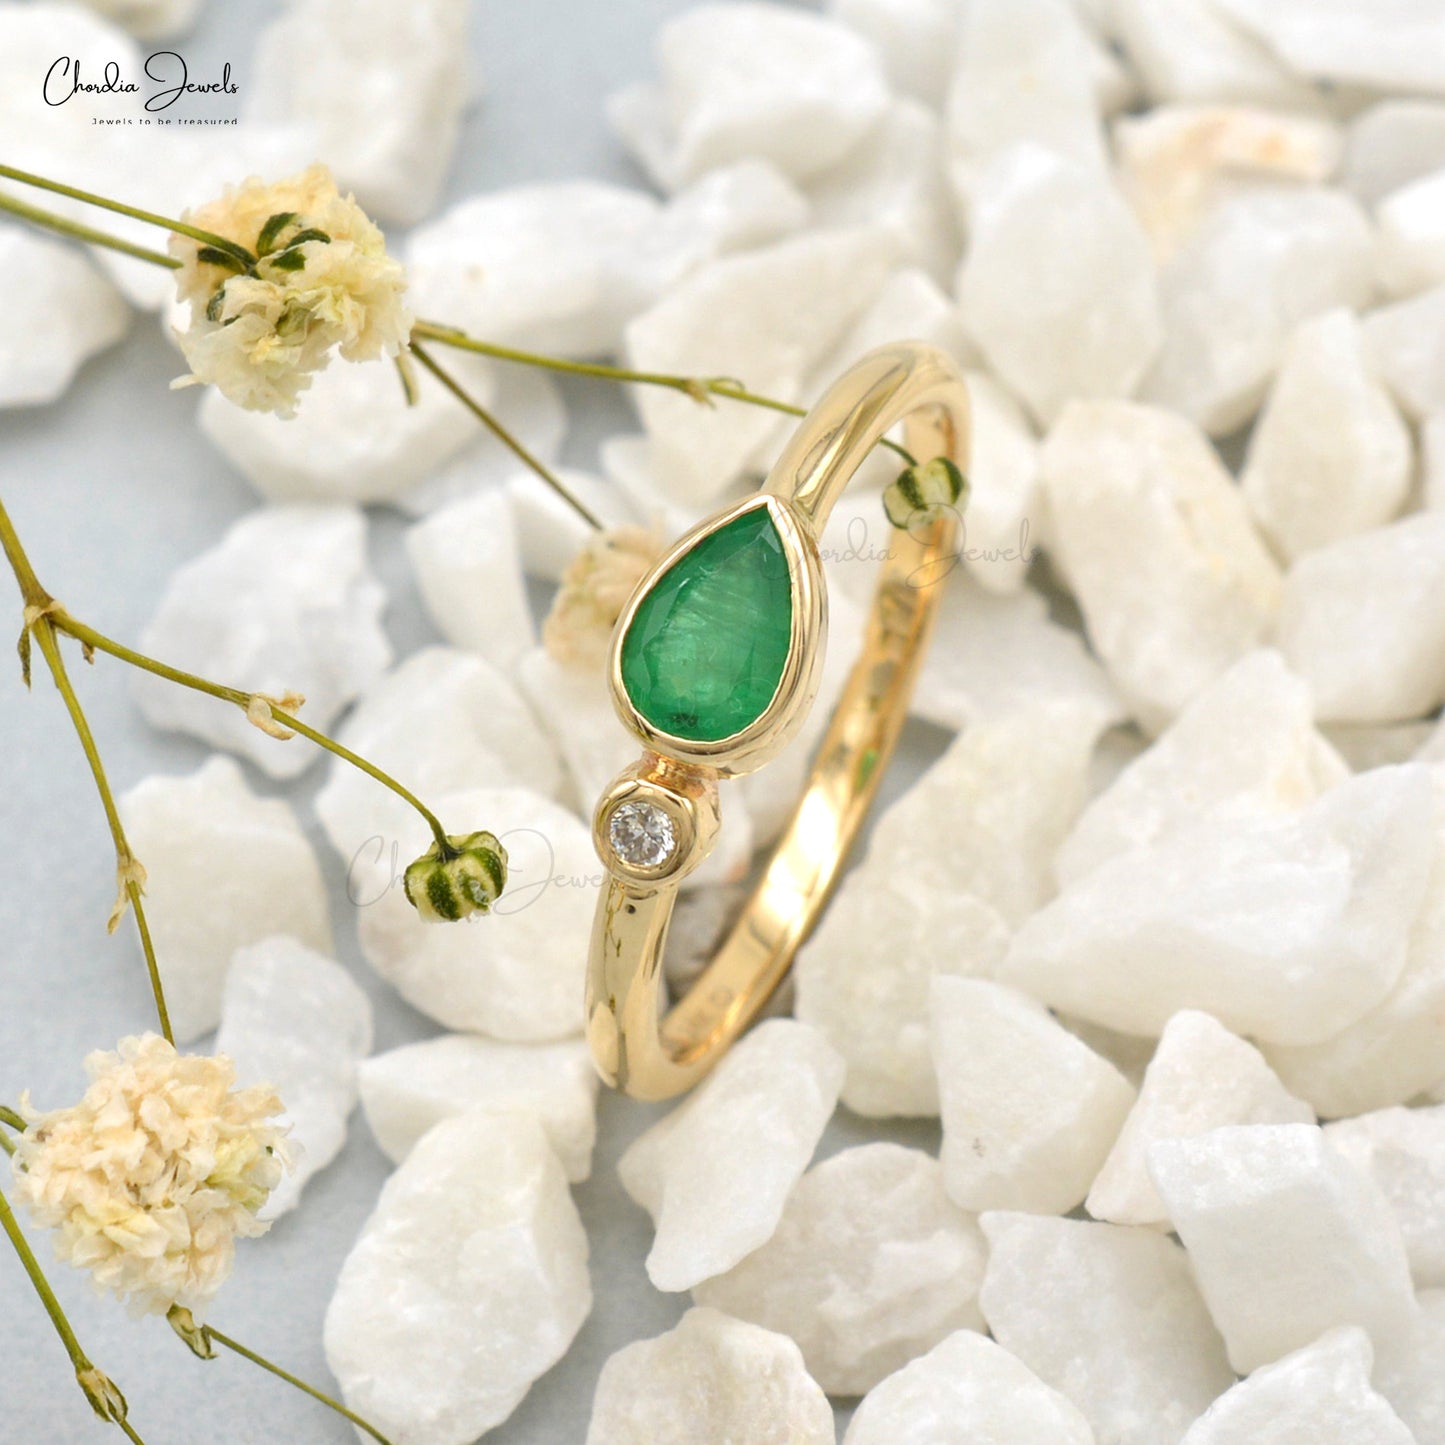 Load image into Gallery viewer, Natural Emerald 14k Solid Yellow Gold Diamond Ring 6x4mm Pear Cut Gemstone Band For May Birthstone
